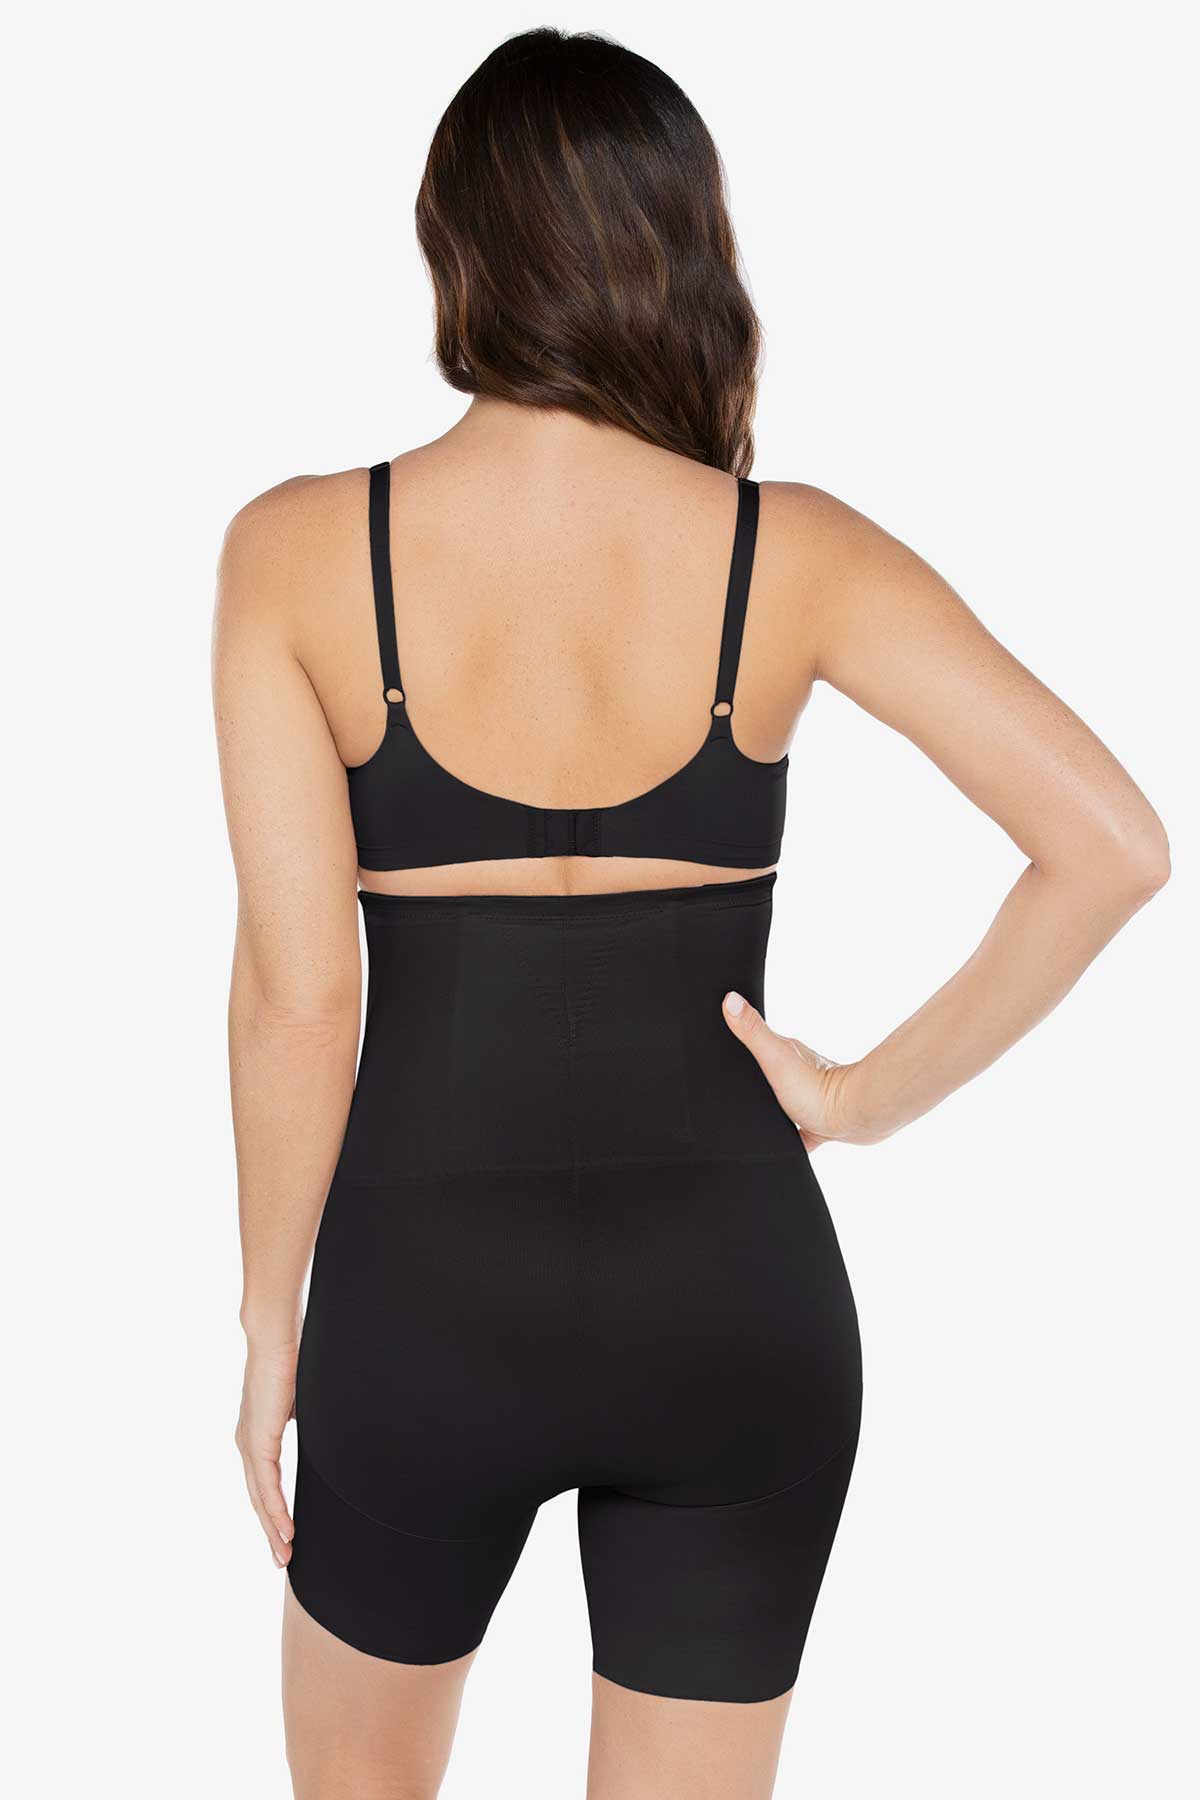 Miraclesuit Shapewear Streamline Torsette with Thigh Slimmer – Top